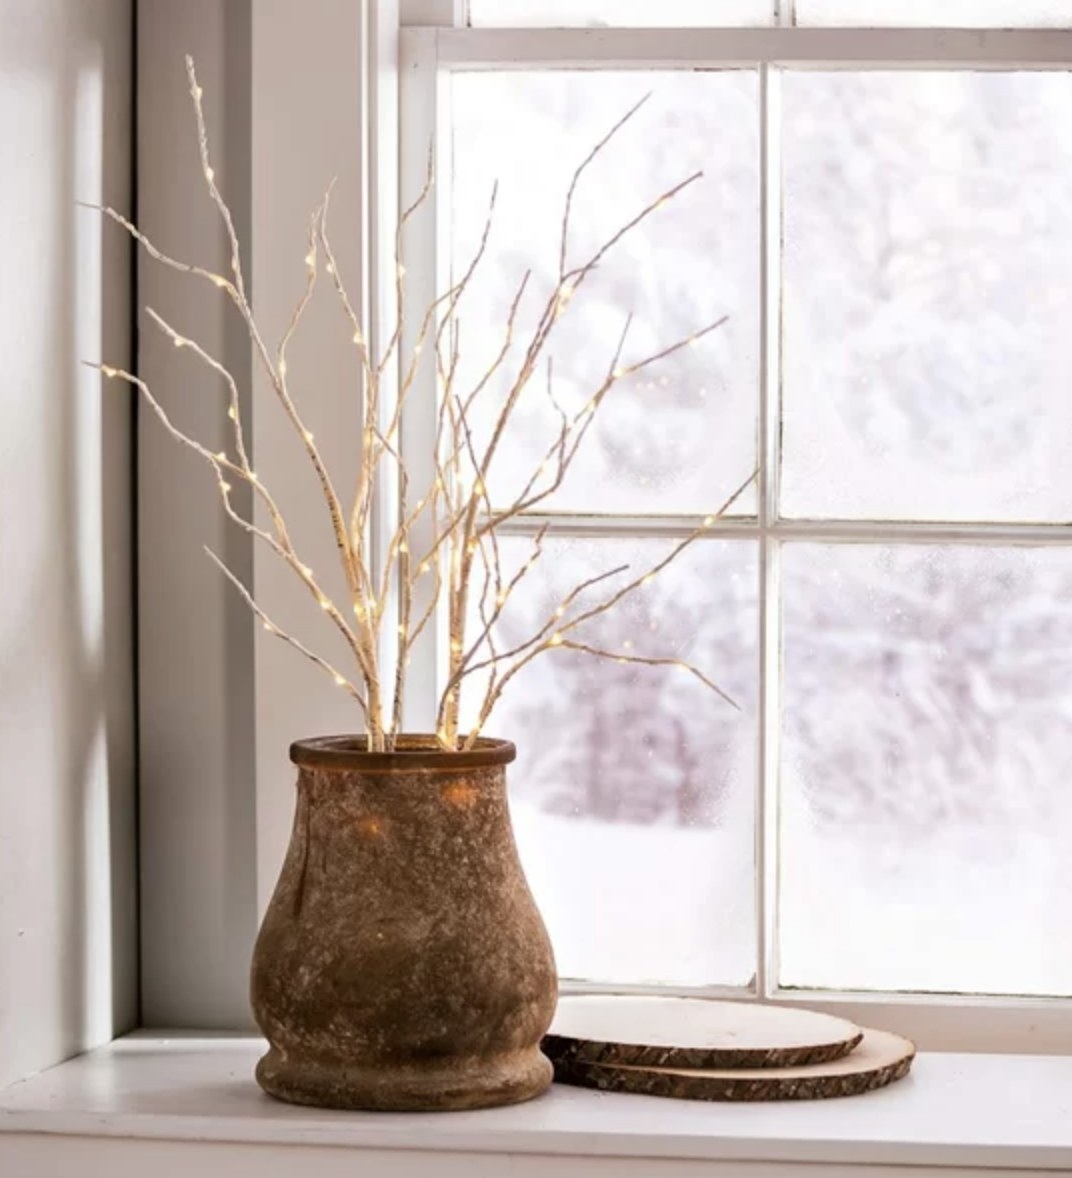 The light branches are next to a snowy window and in dark ceramic vase